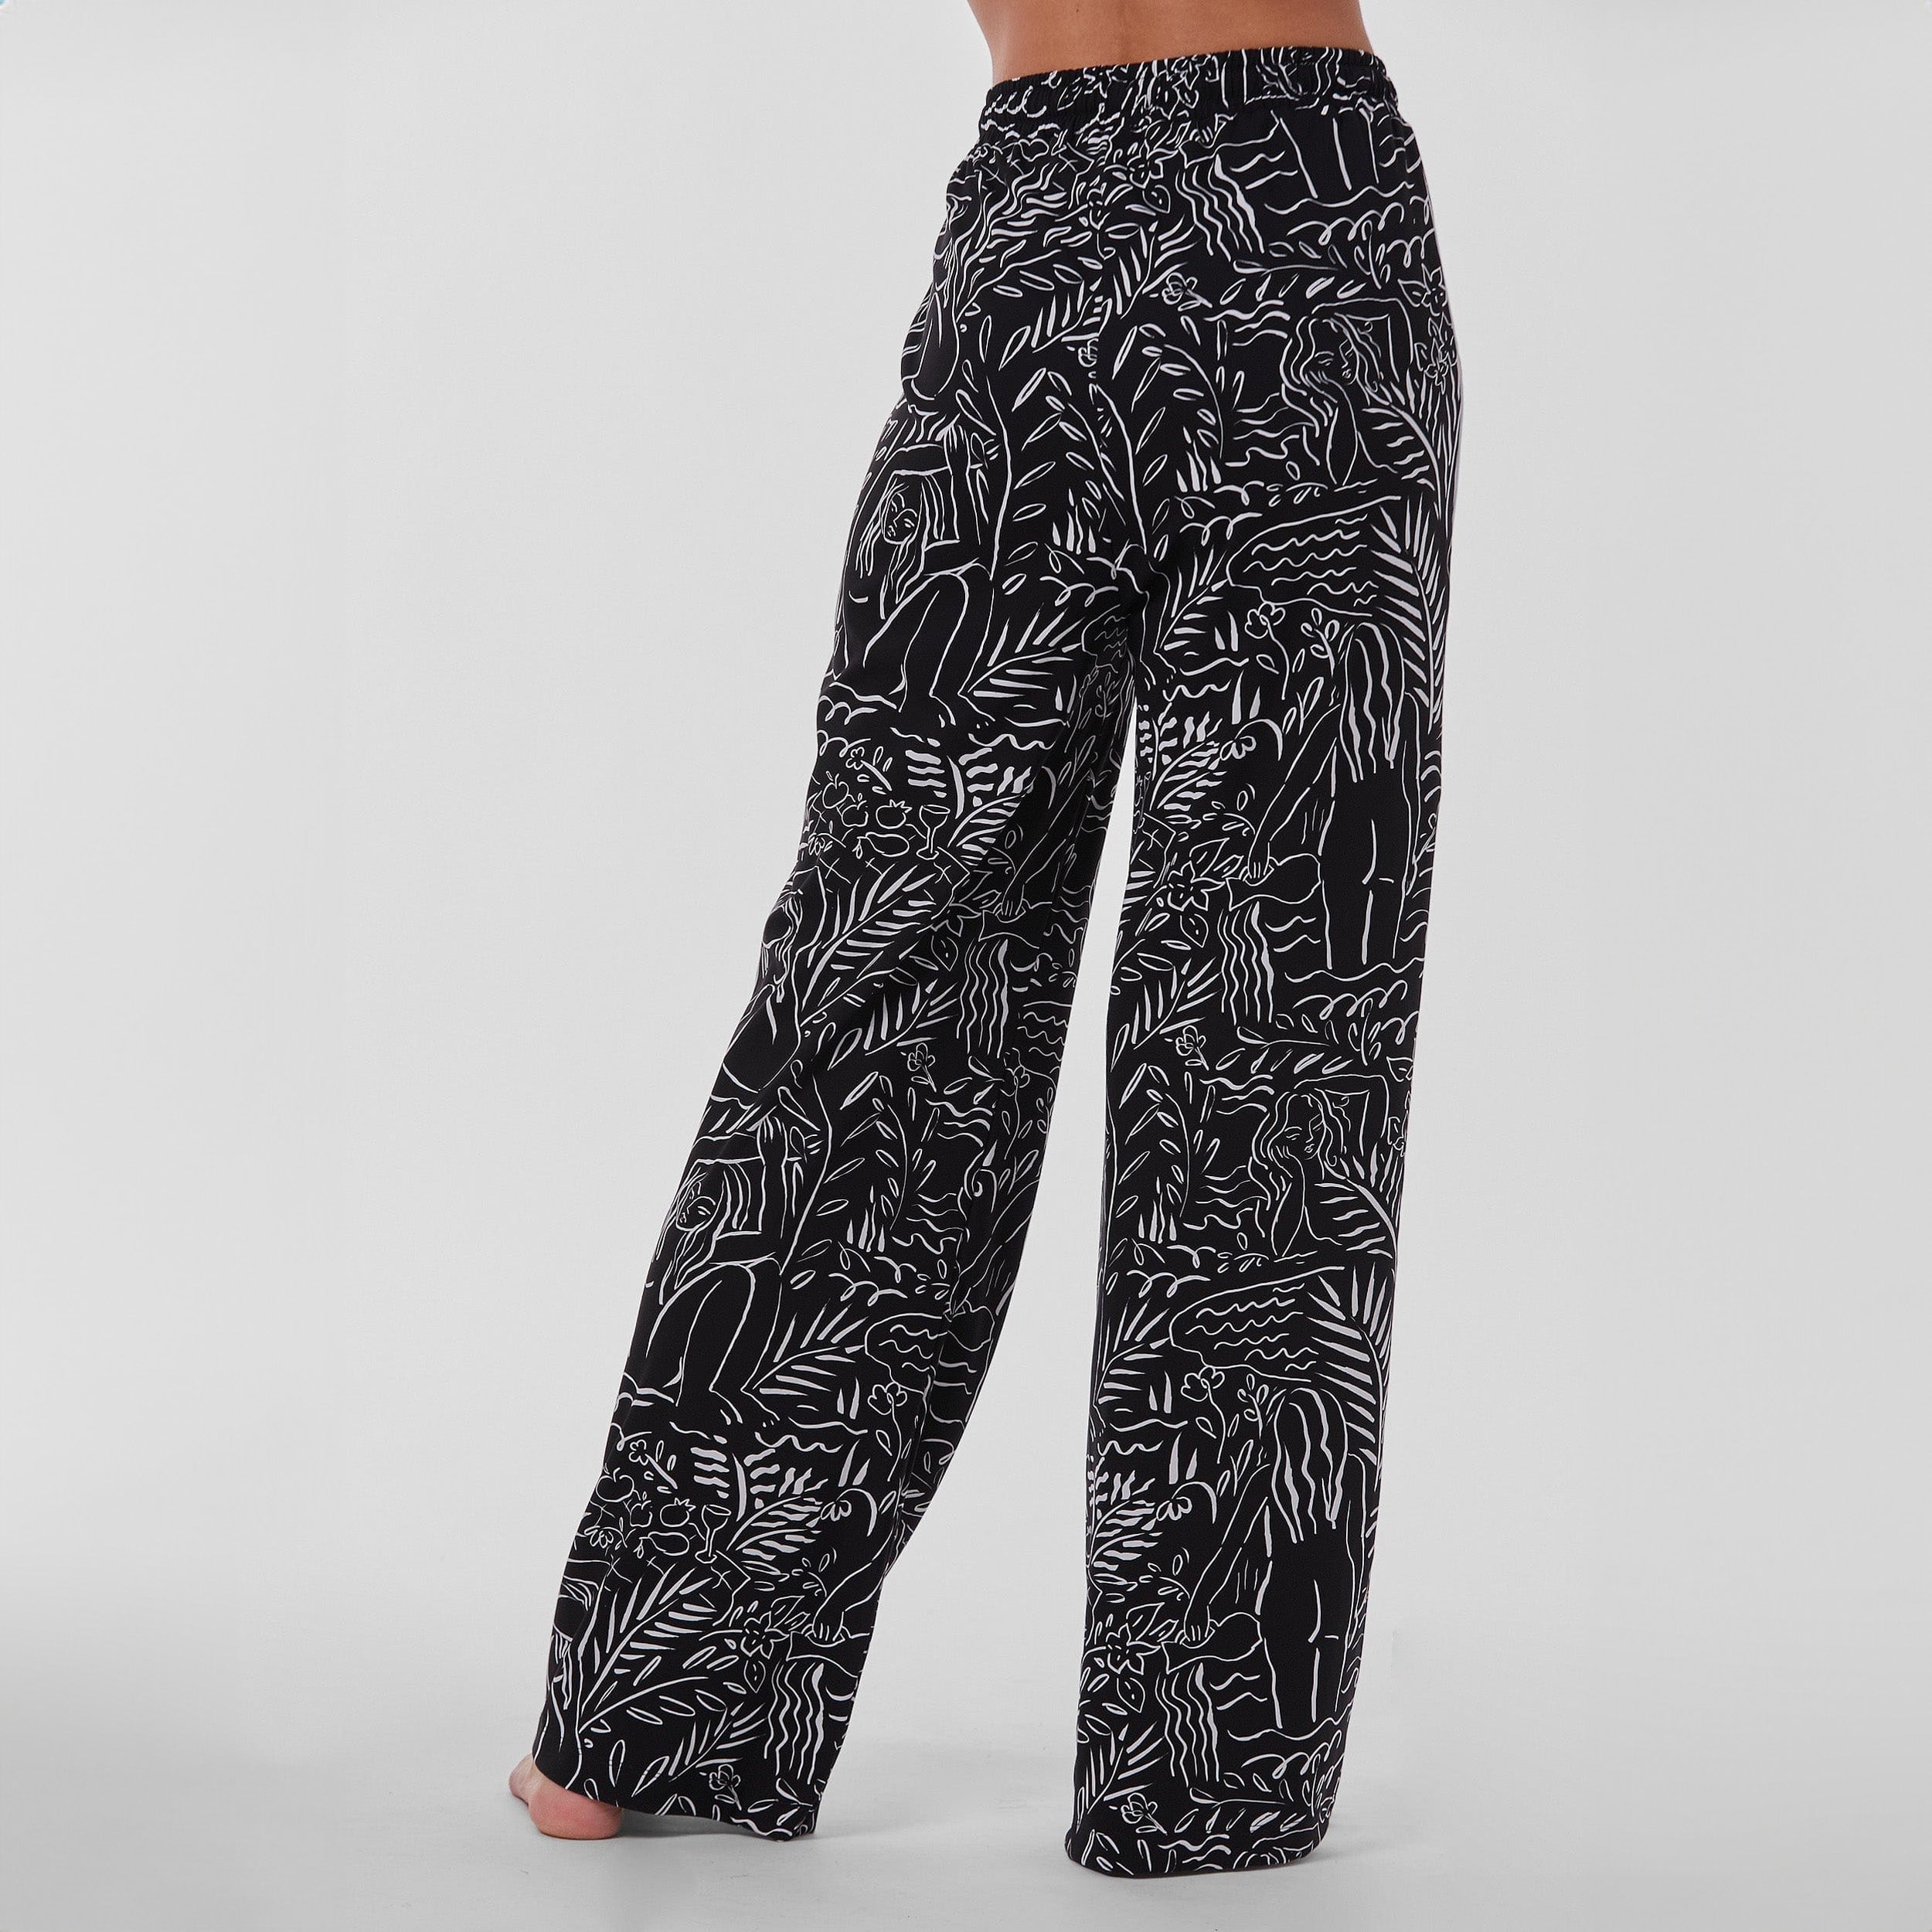 Rear view of woman wearing breathable, relaxed and buttery smooth pajama pant featuring high-waist cut, side pockets, front tie and stunning Venus print.